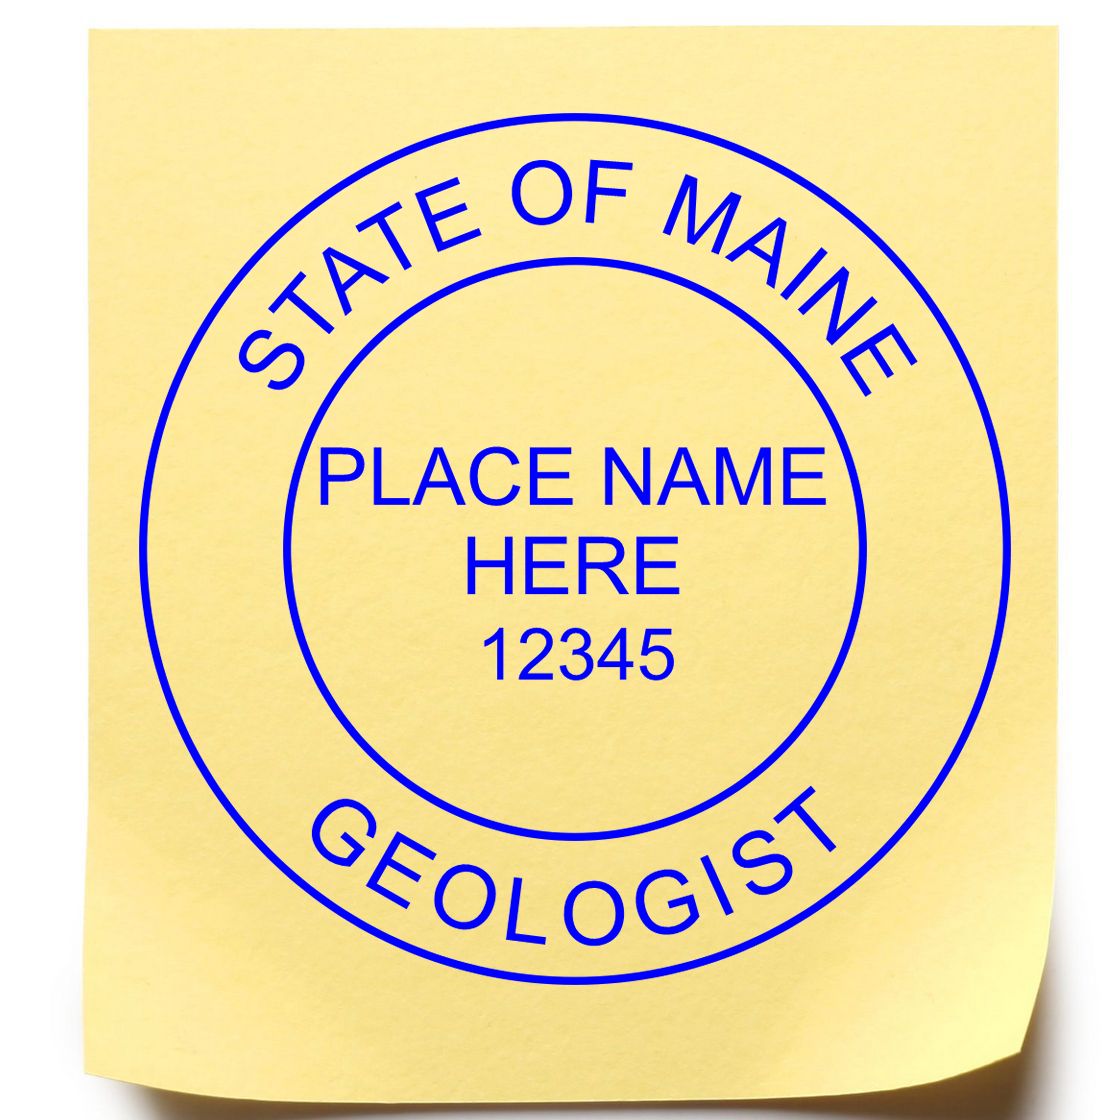 Another Example of a stamped impression of the Premium MaxLight Pre-Inked Maine Geology Stamp on a office form